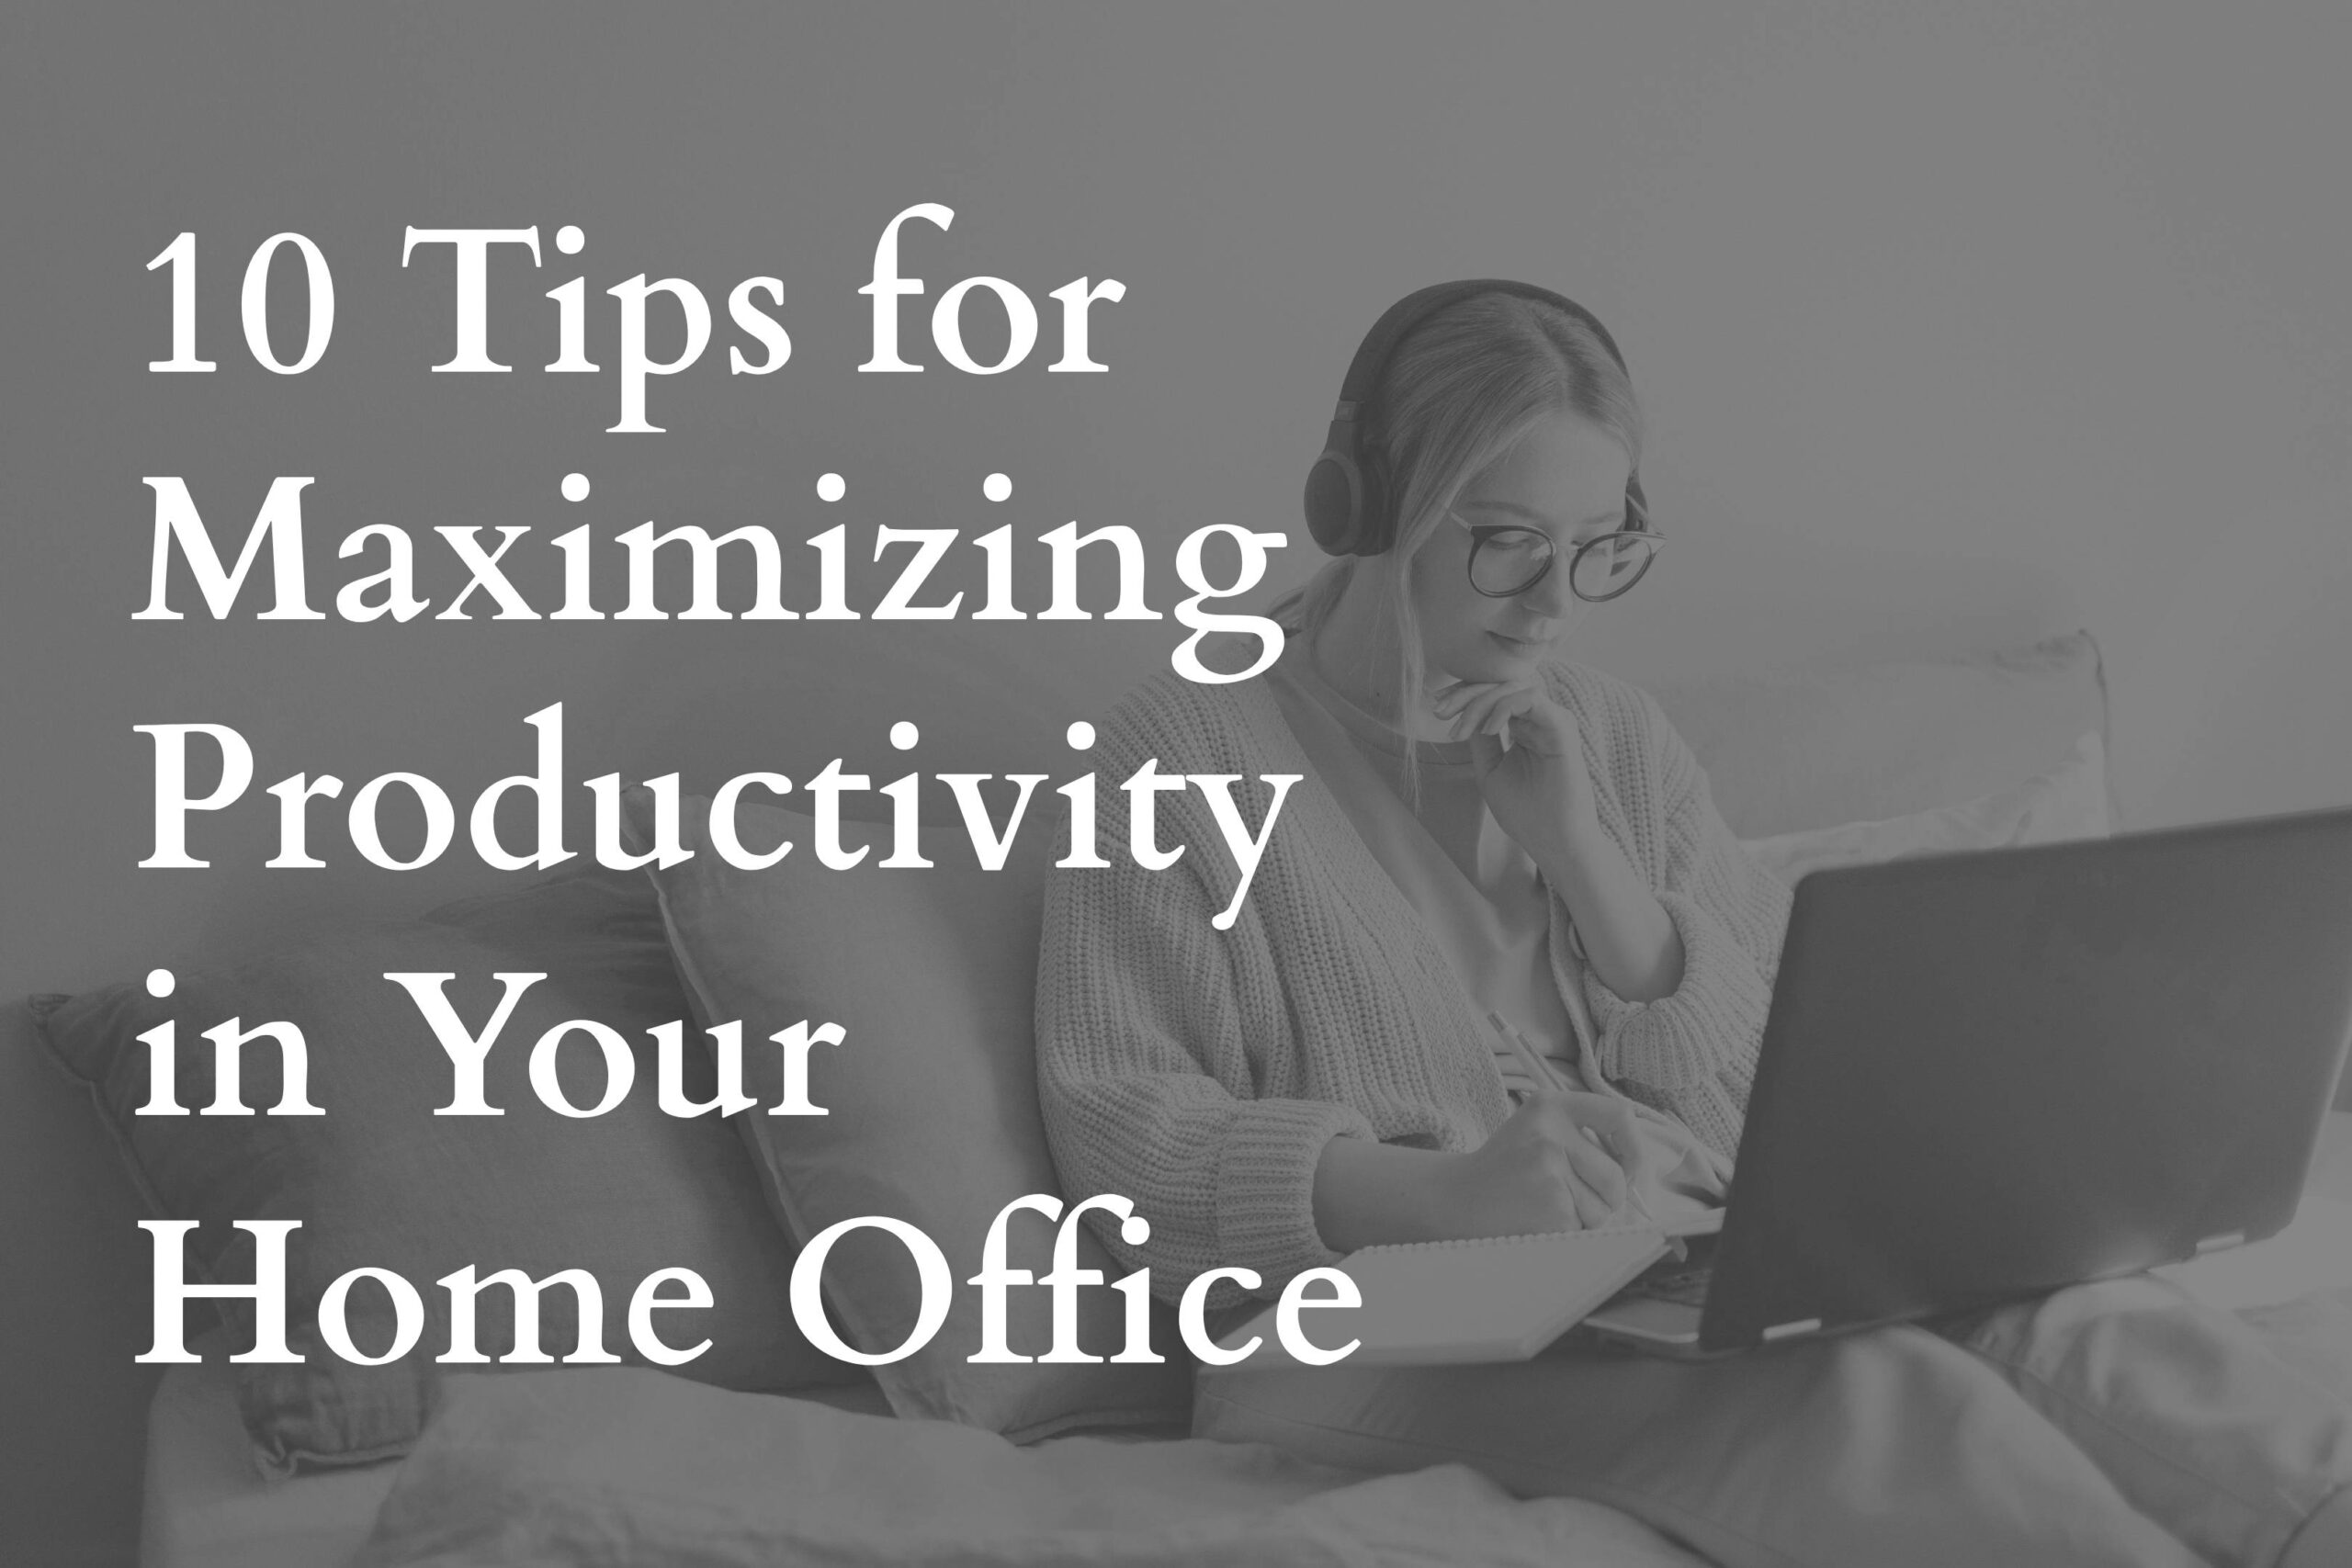 10 Tips for Maximizing Productivity in Your Home Office